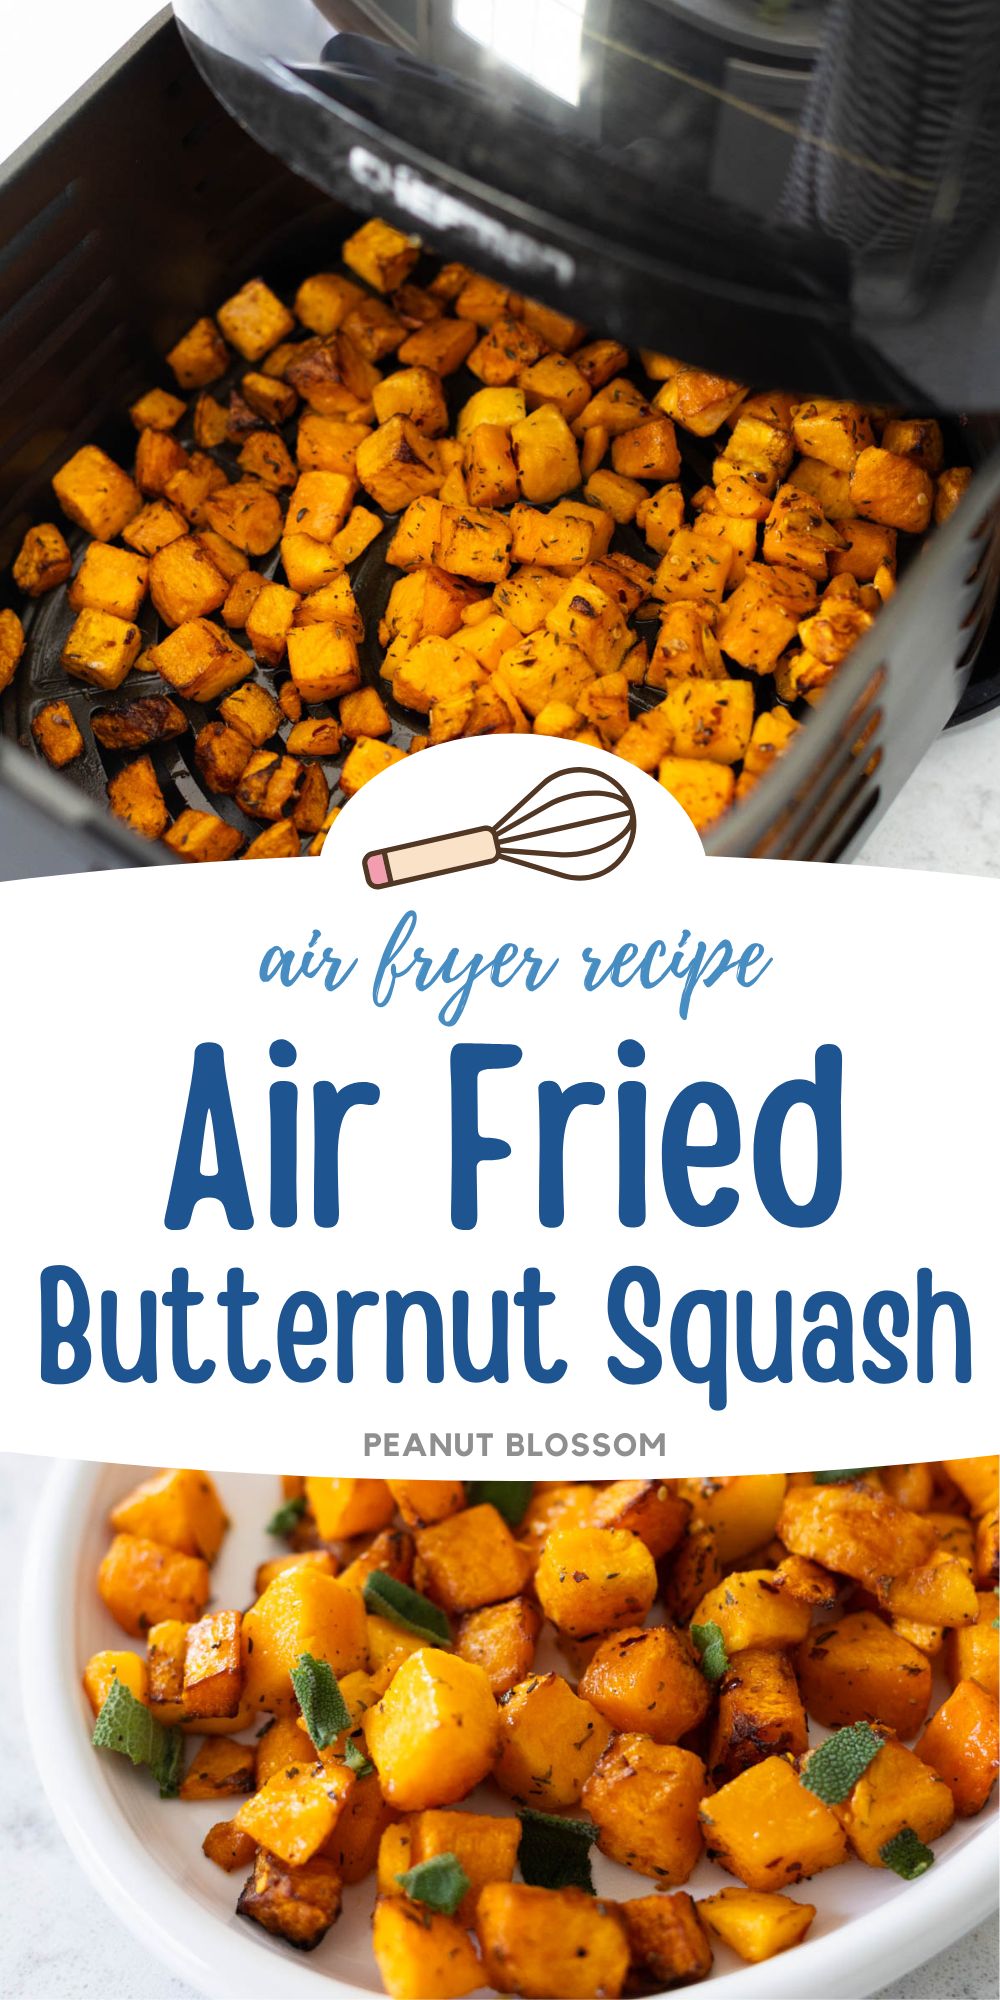 The photo collage shows the butternut squash in an air fryer basket next to the roasted squash on a platter.